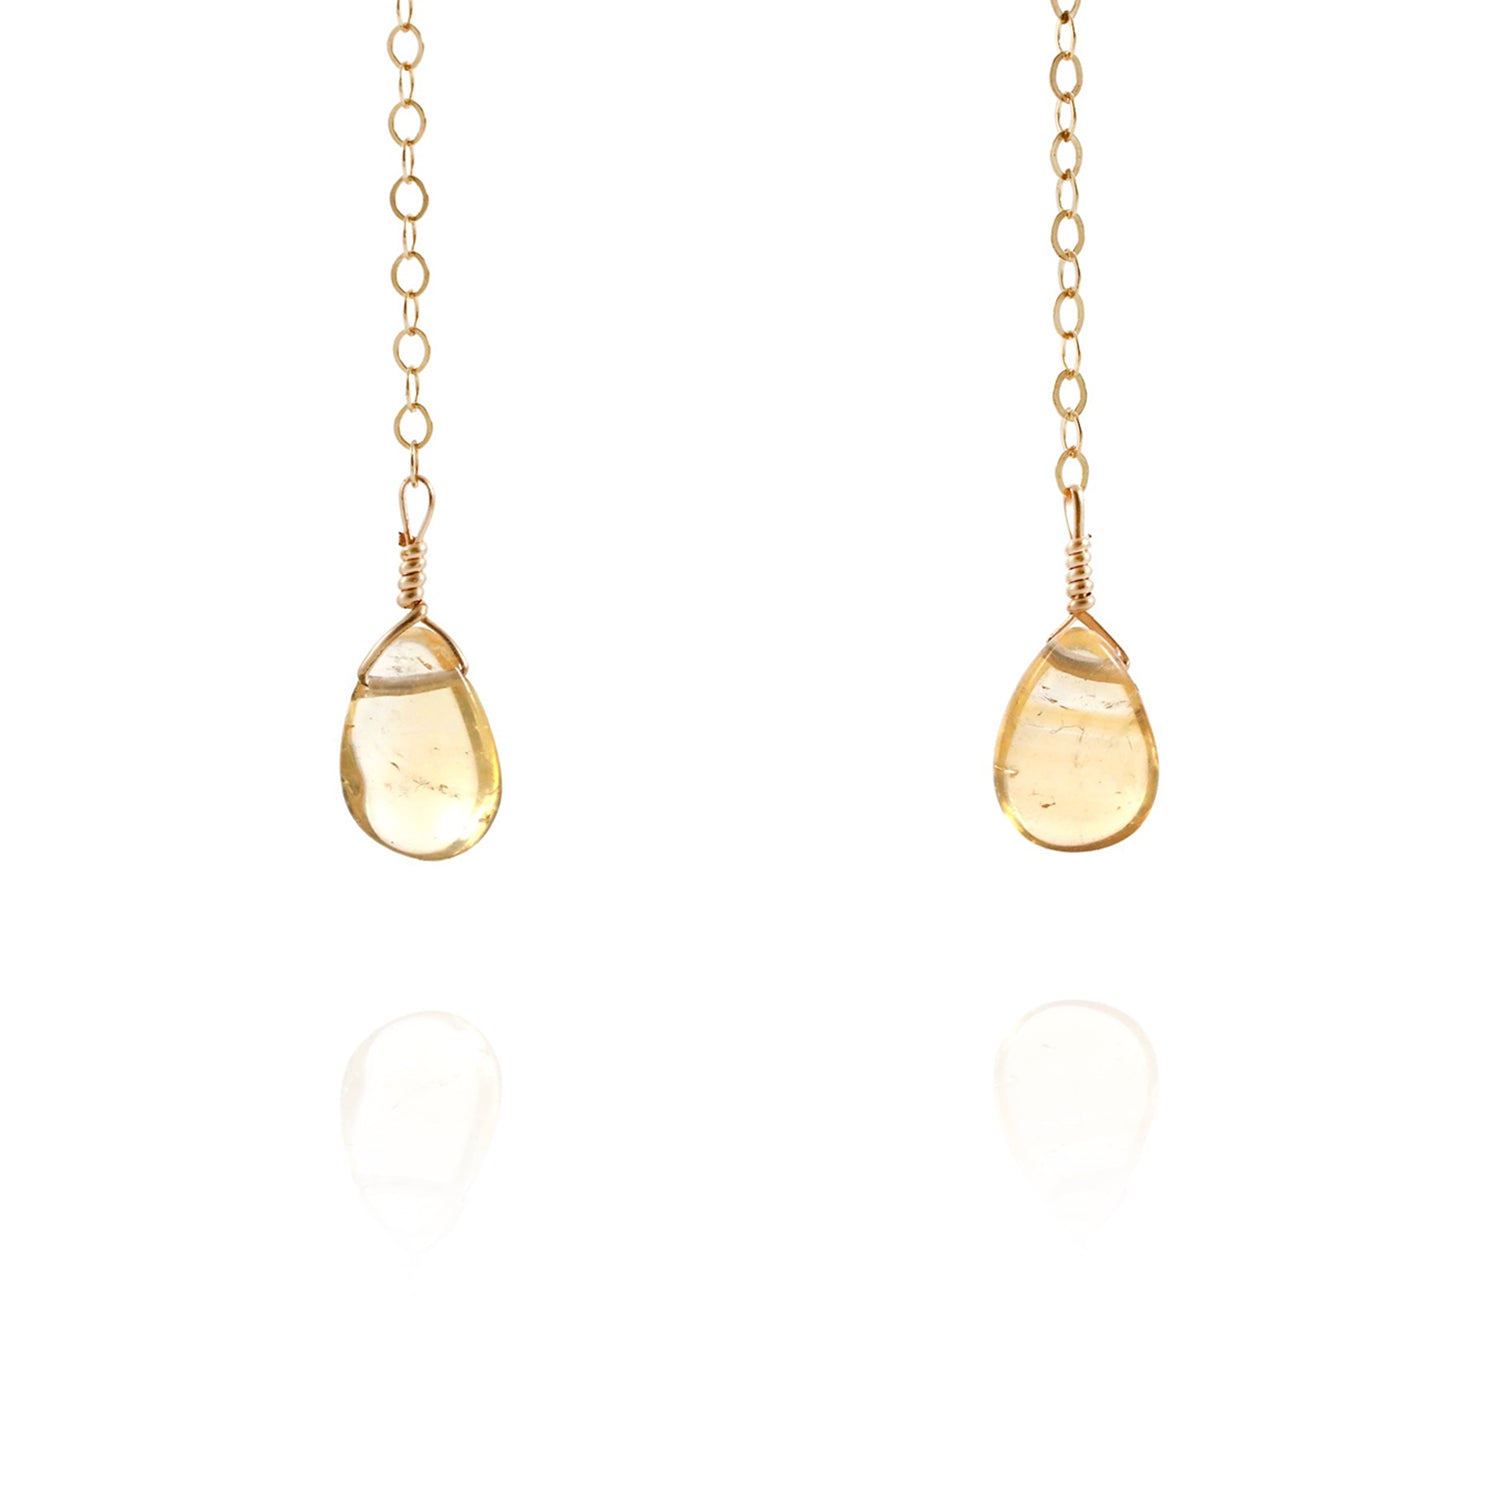 gold dangly earrings with gemstones